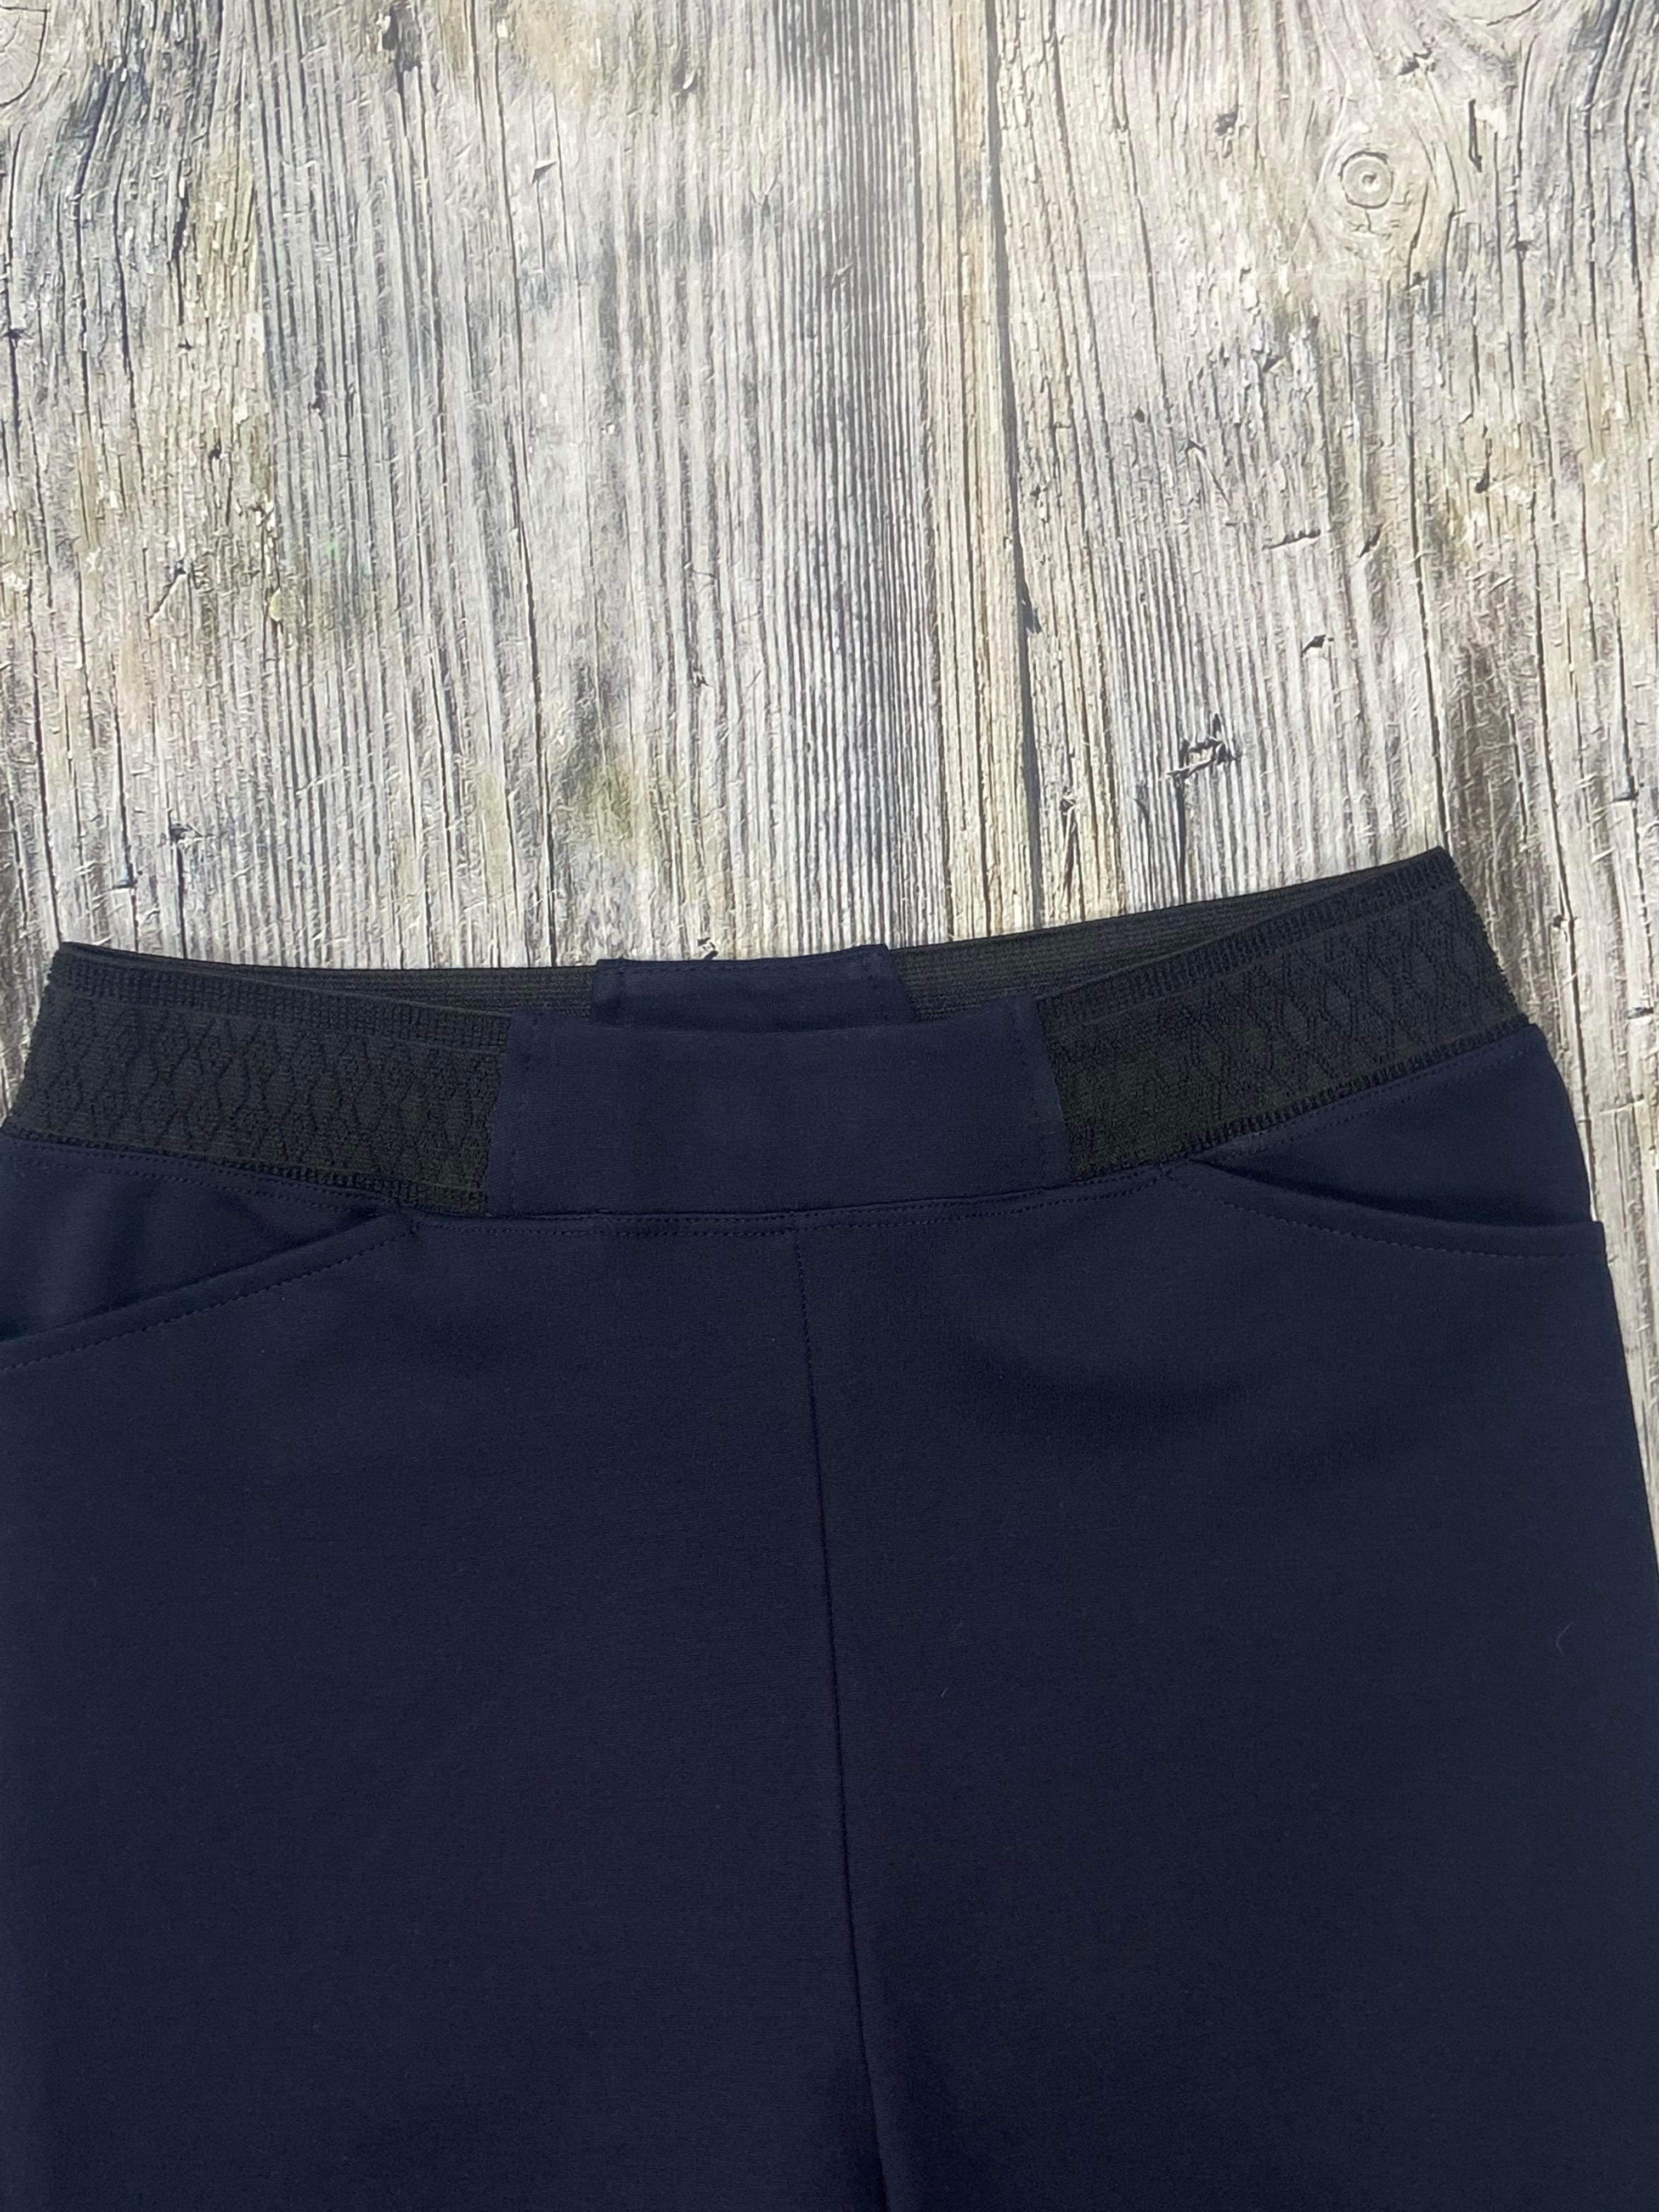 Perfect Navy High Waisted Ponte Pant